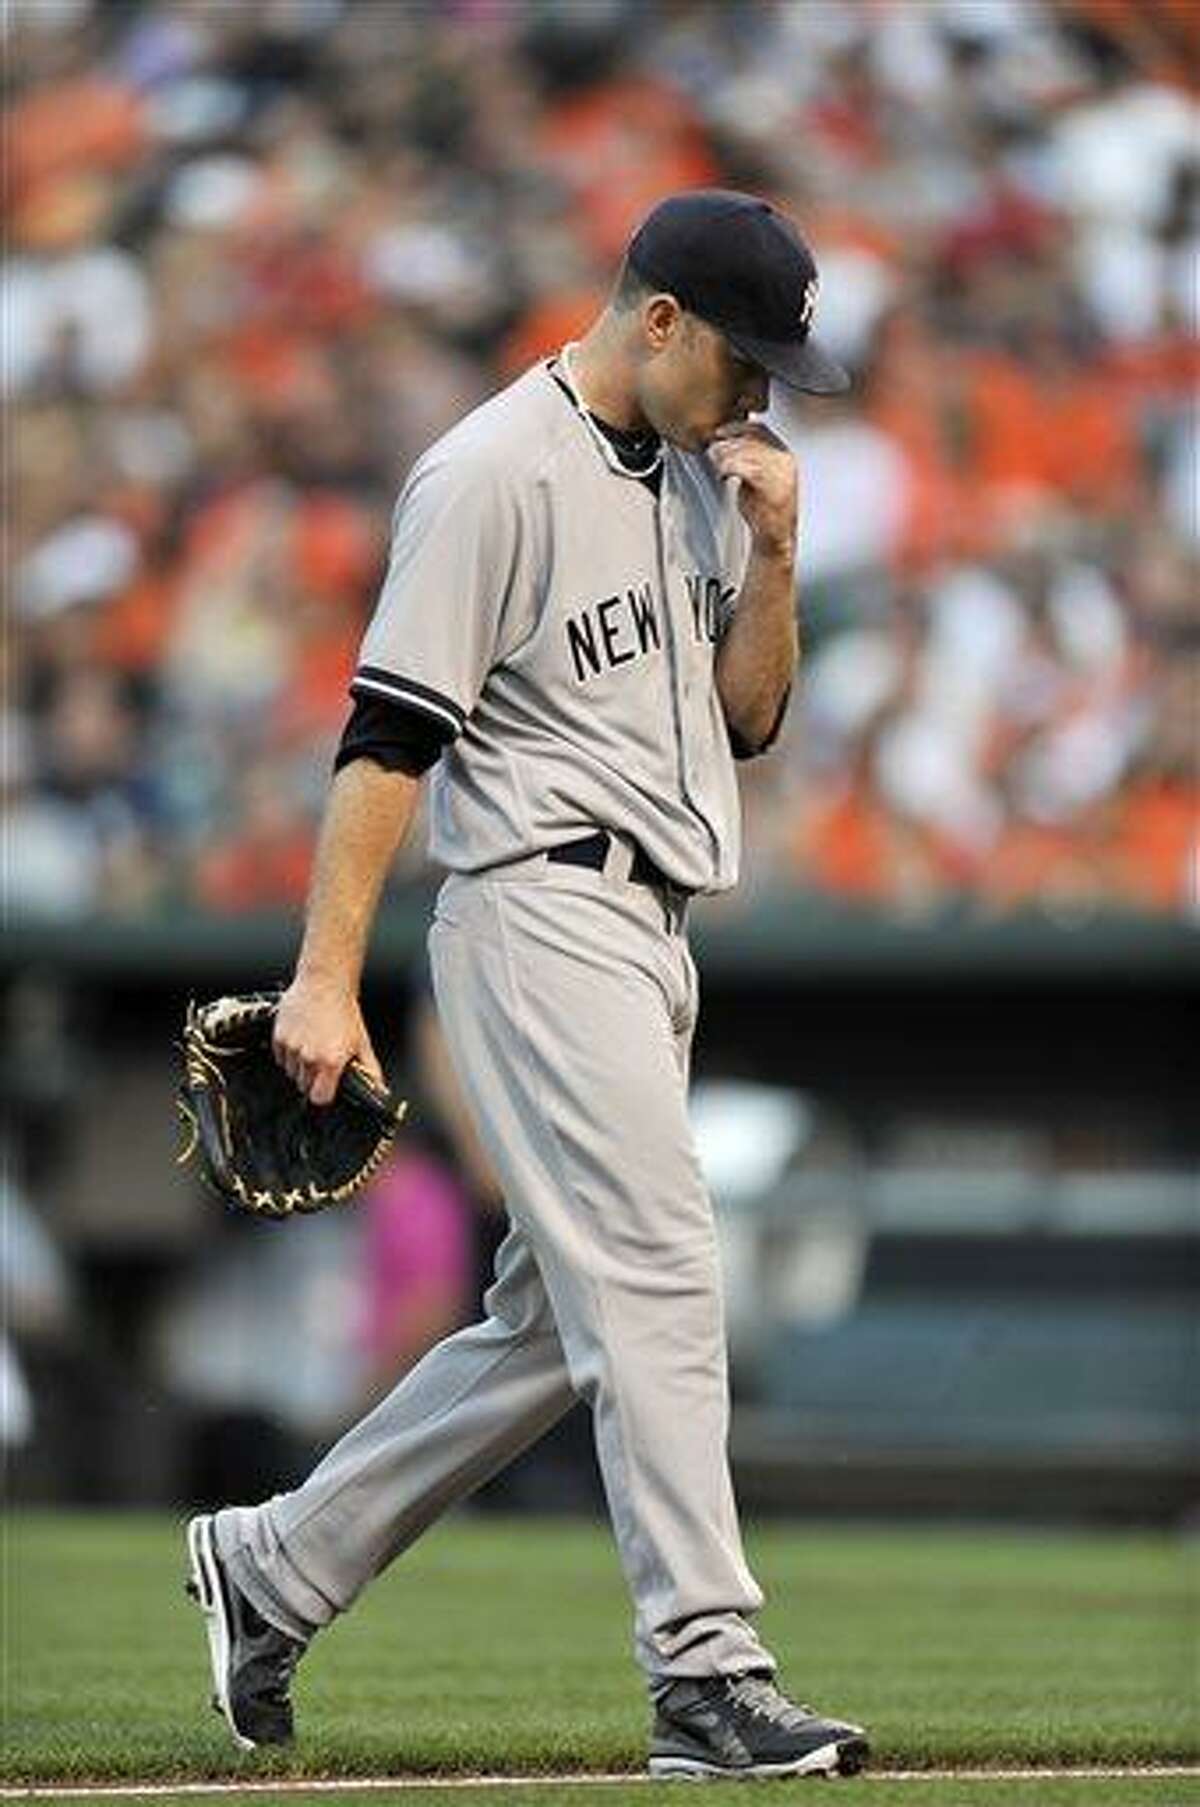 New York Yankees pitcher Kevin Phelps walks to the dugout after giving up four runs to the Baltimore Orioles in the first inning of a baseball game, Saturday, June 29, 2013, in Baltimore. (AP Photo/Gail Burton)